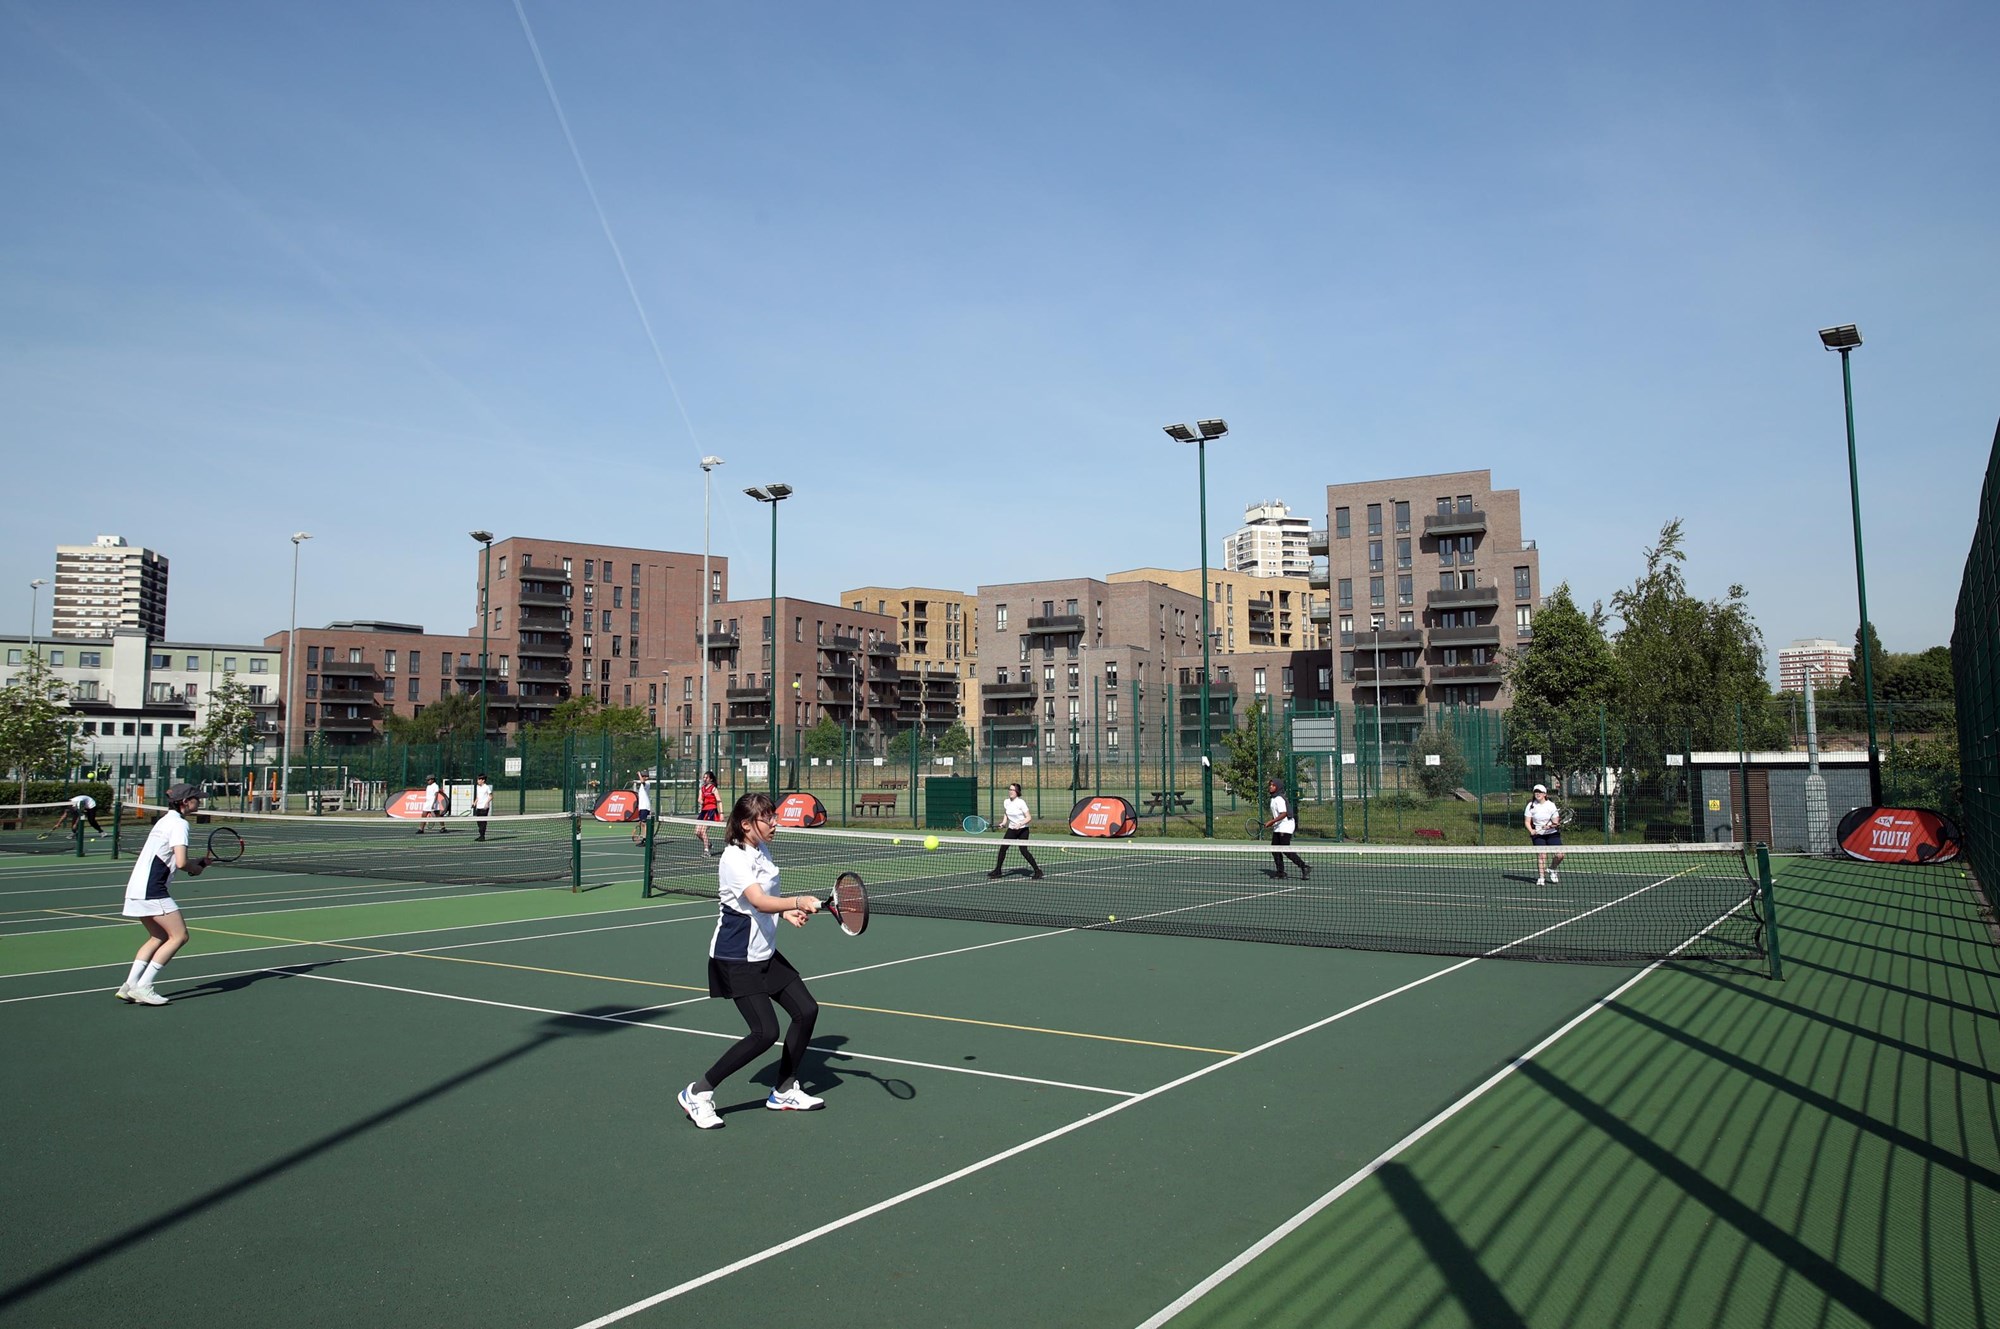 Pupils from St Paul's Way School taking part in an LTA Youth Session during 'Emma Raducanu's US Open Trophy Tour' 